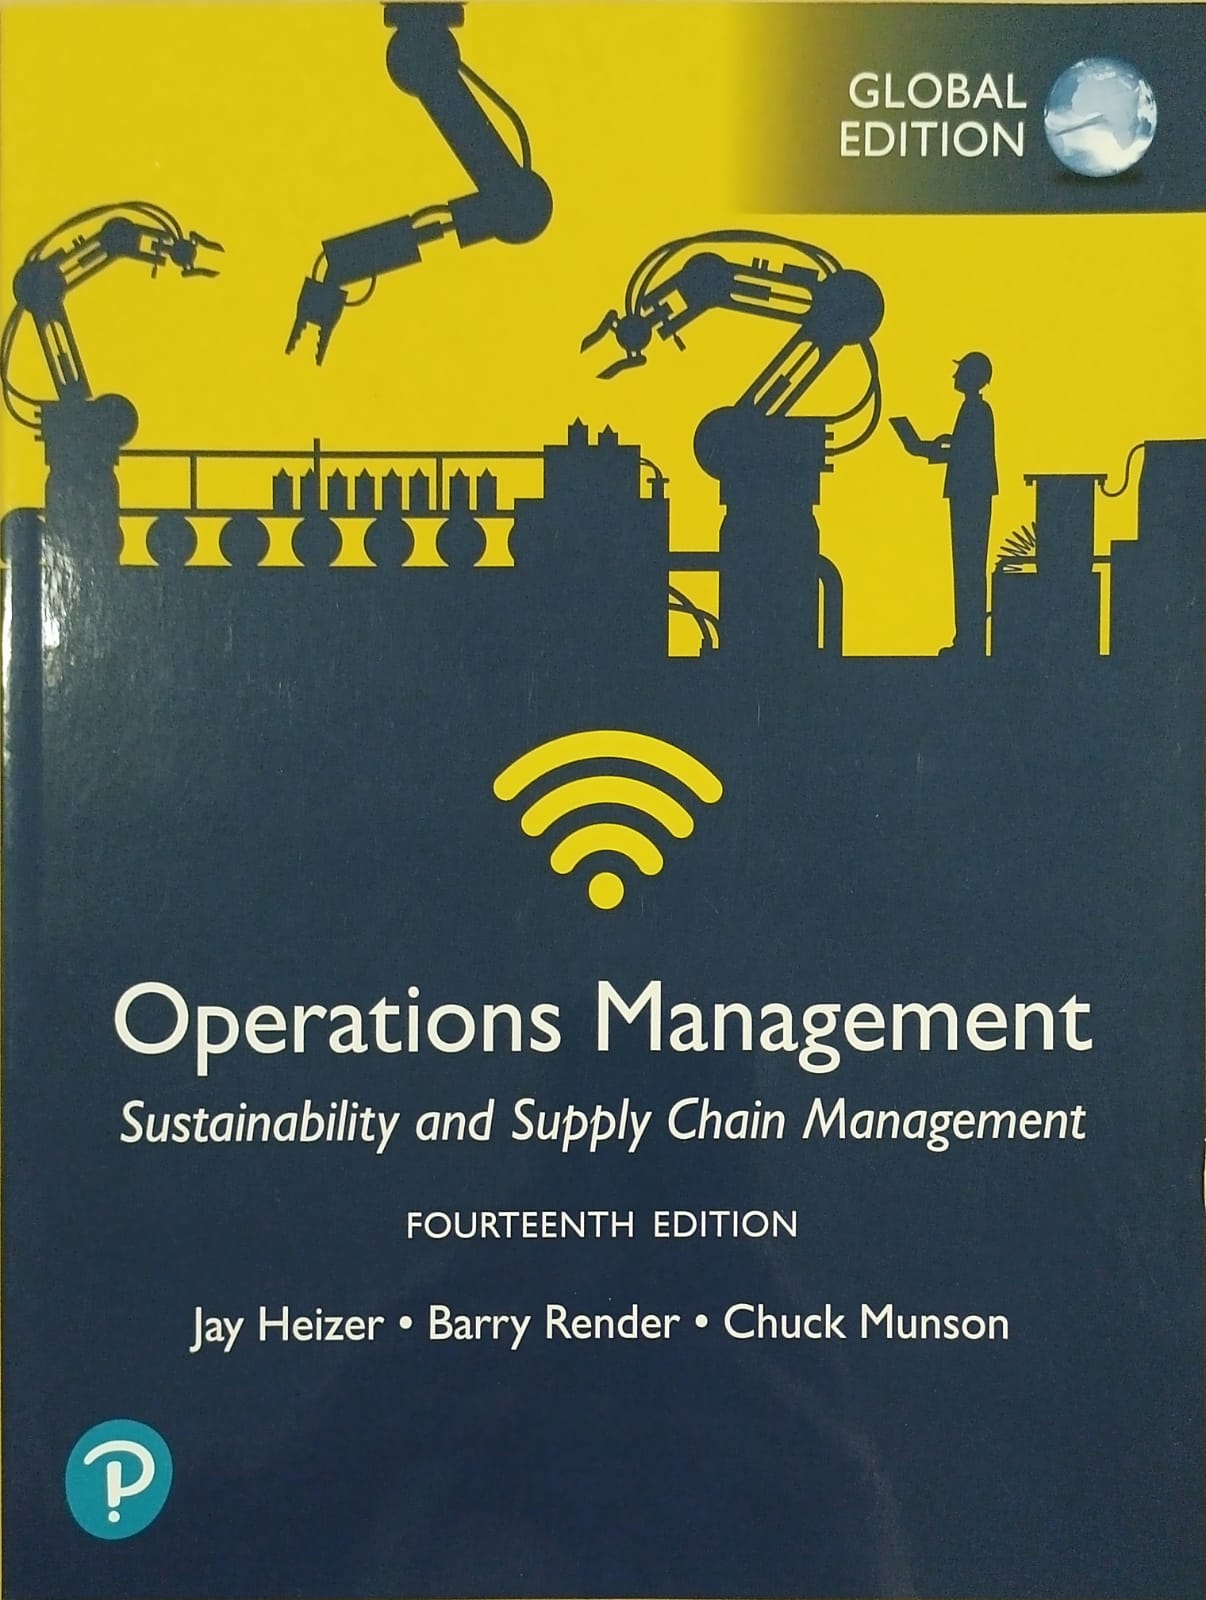 Operations management: sustainability and supply chain management 14th edition